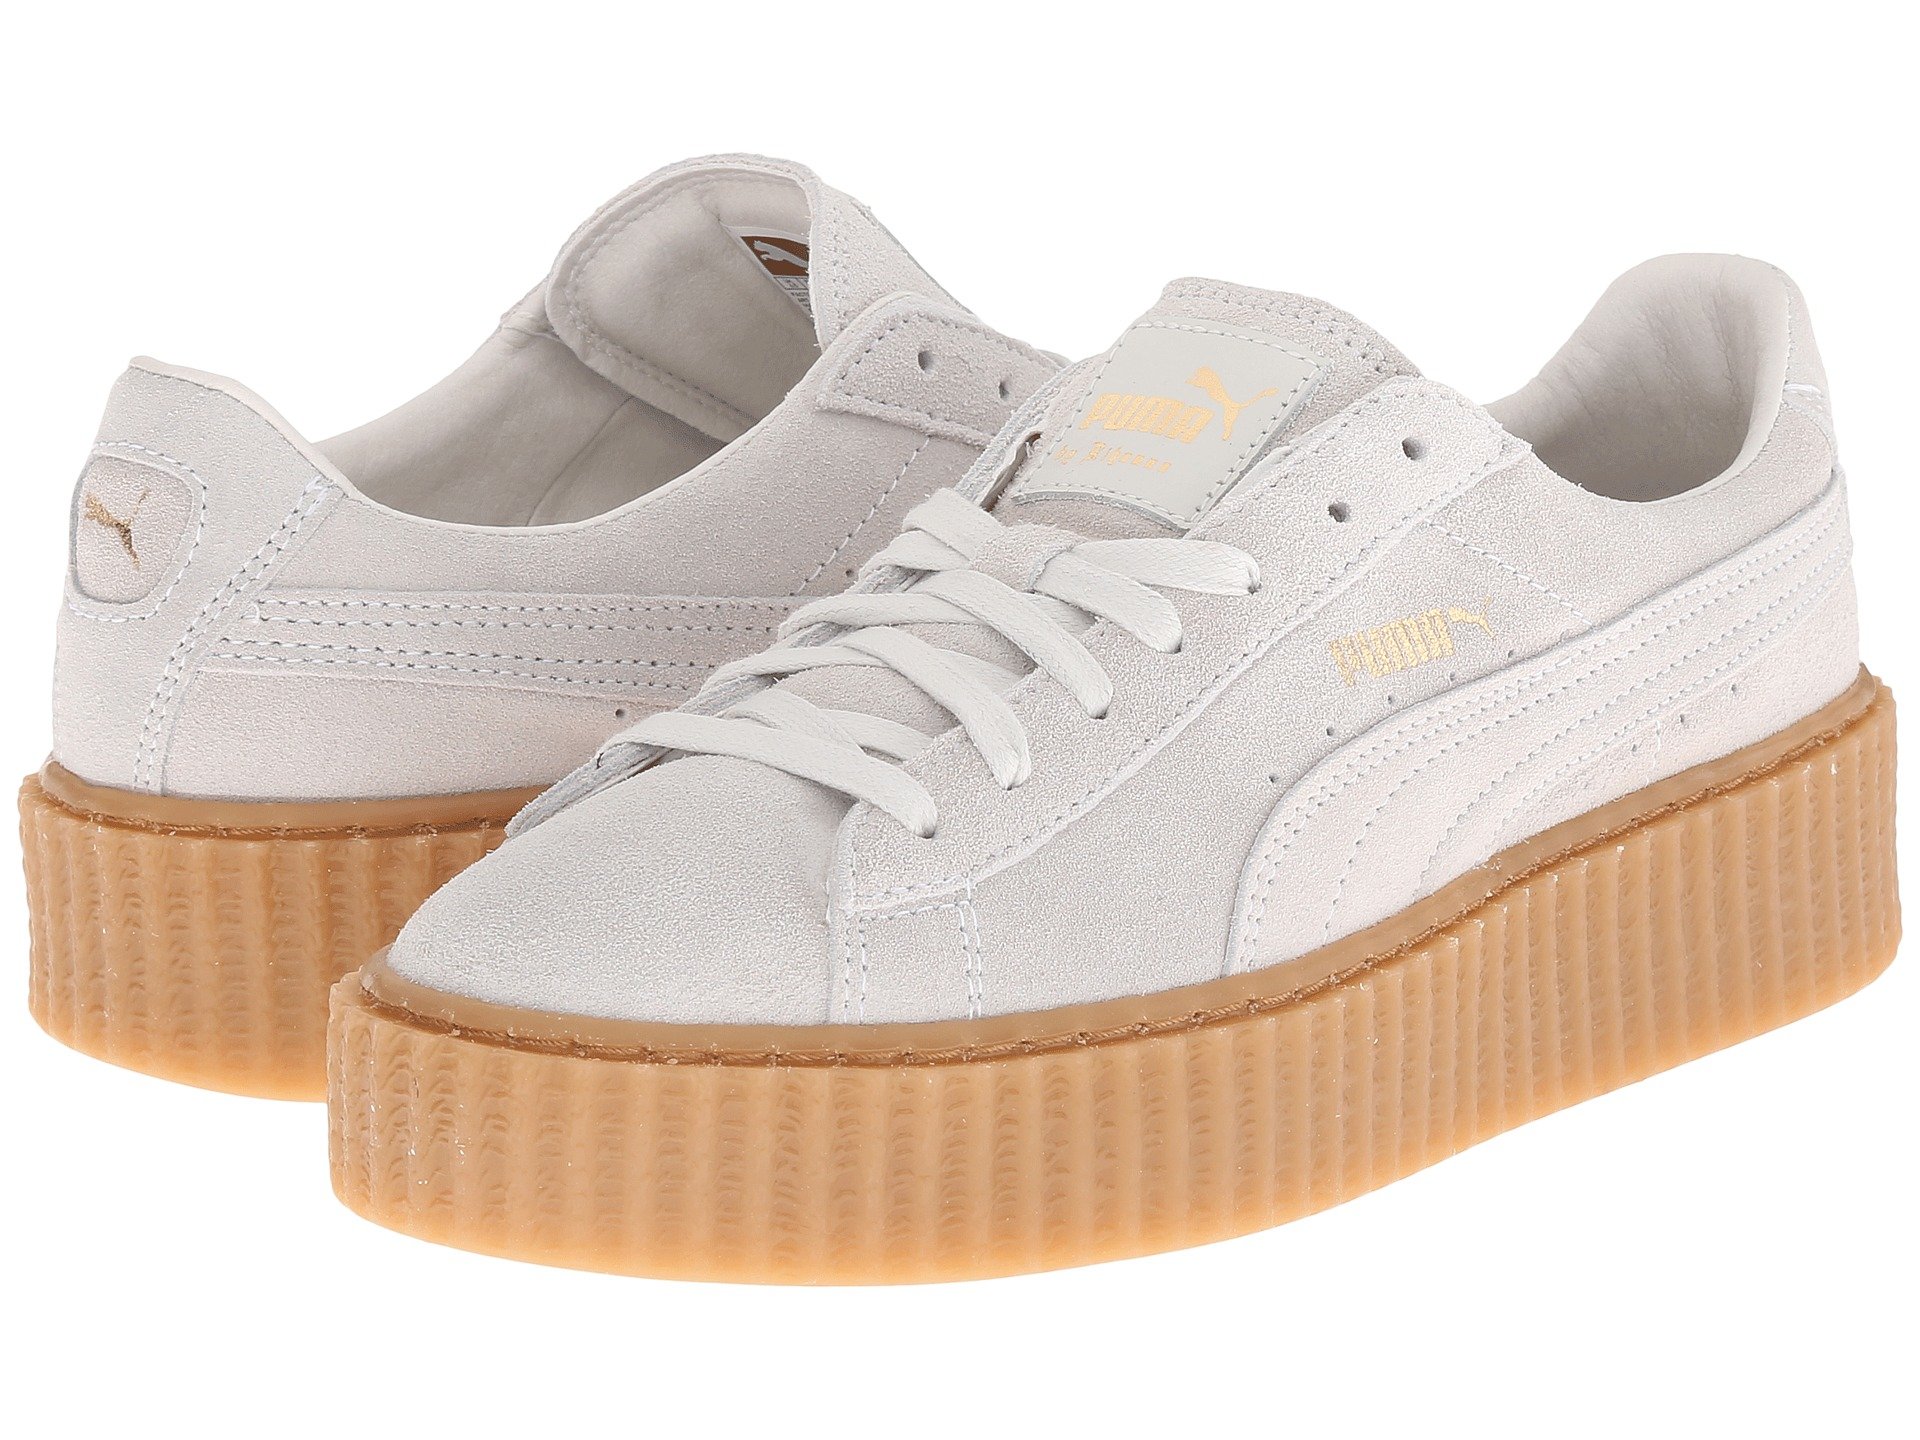 PUMA Rihanna X Suede Creepers in White - Lyst